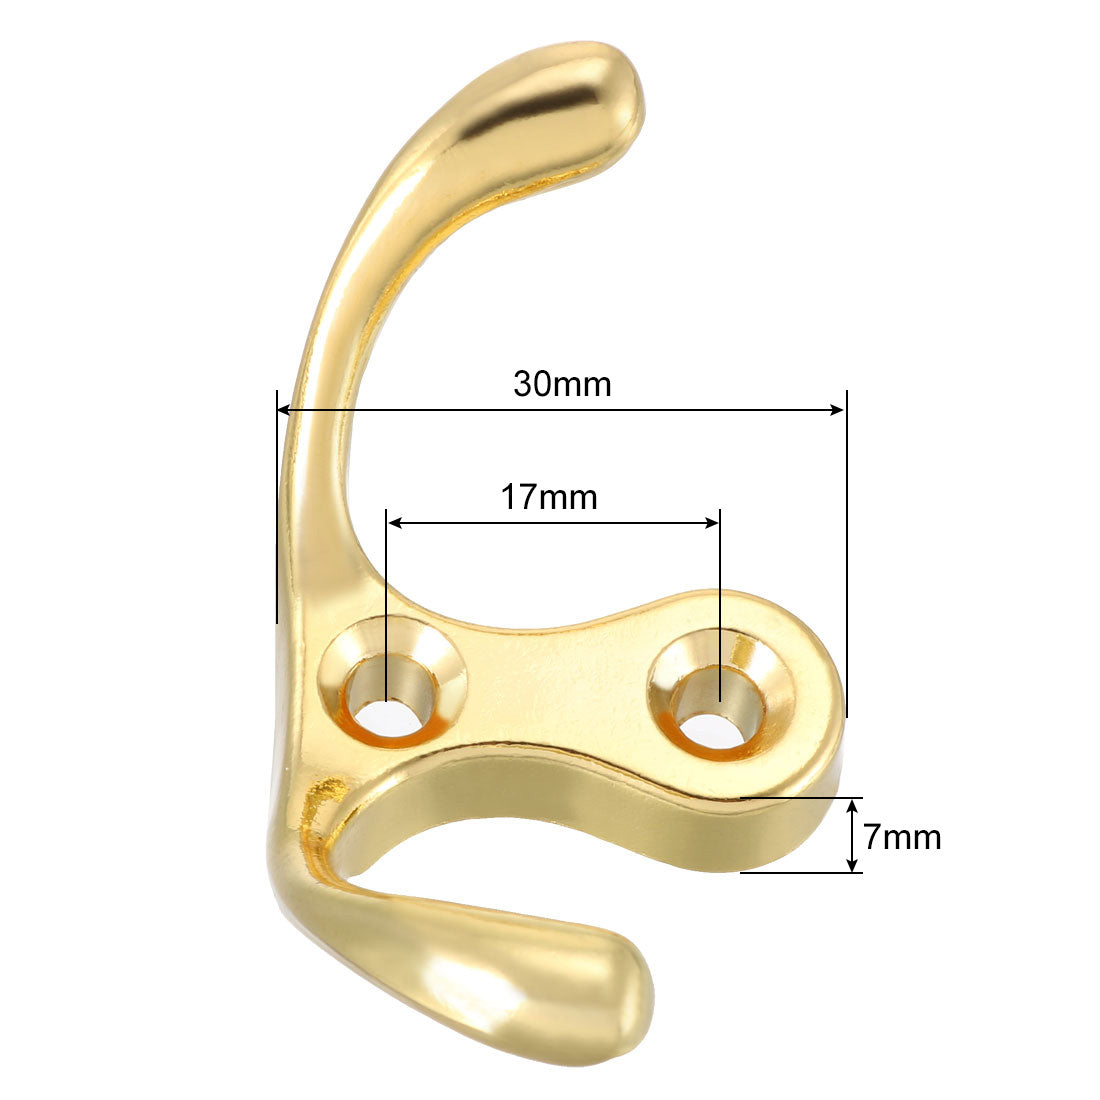 uxcell Uxcell Dual Prong Coat Hooks Wall Mounted Retro Double Hooks Utility Gold Hook for Coat Scarf Bag Towel Key Cap Cup Hat 30mm x 55mm x 29mm 5pcs